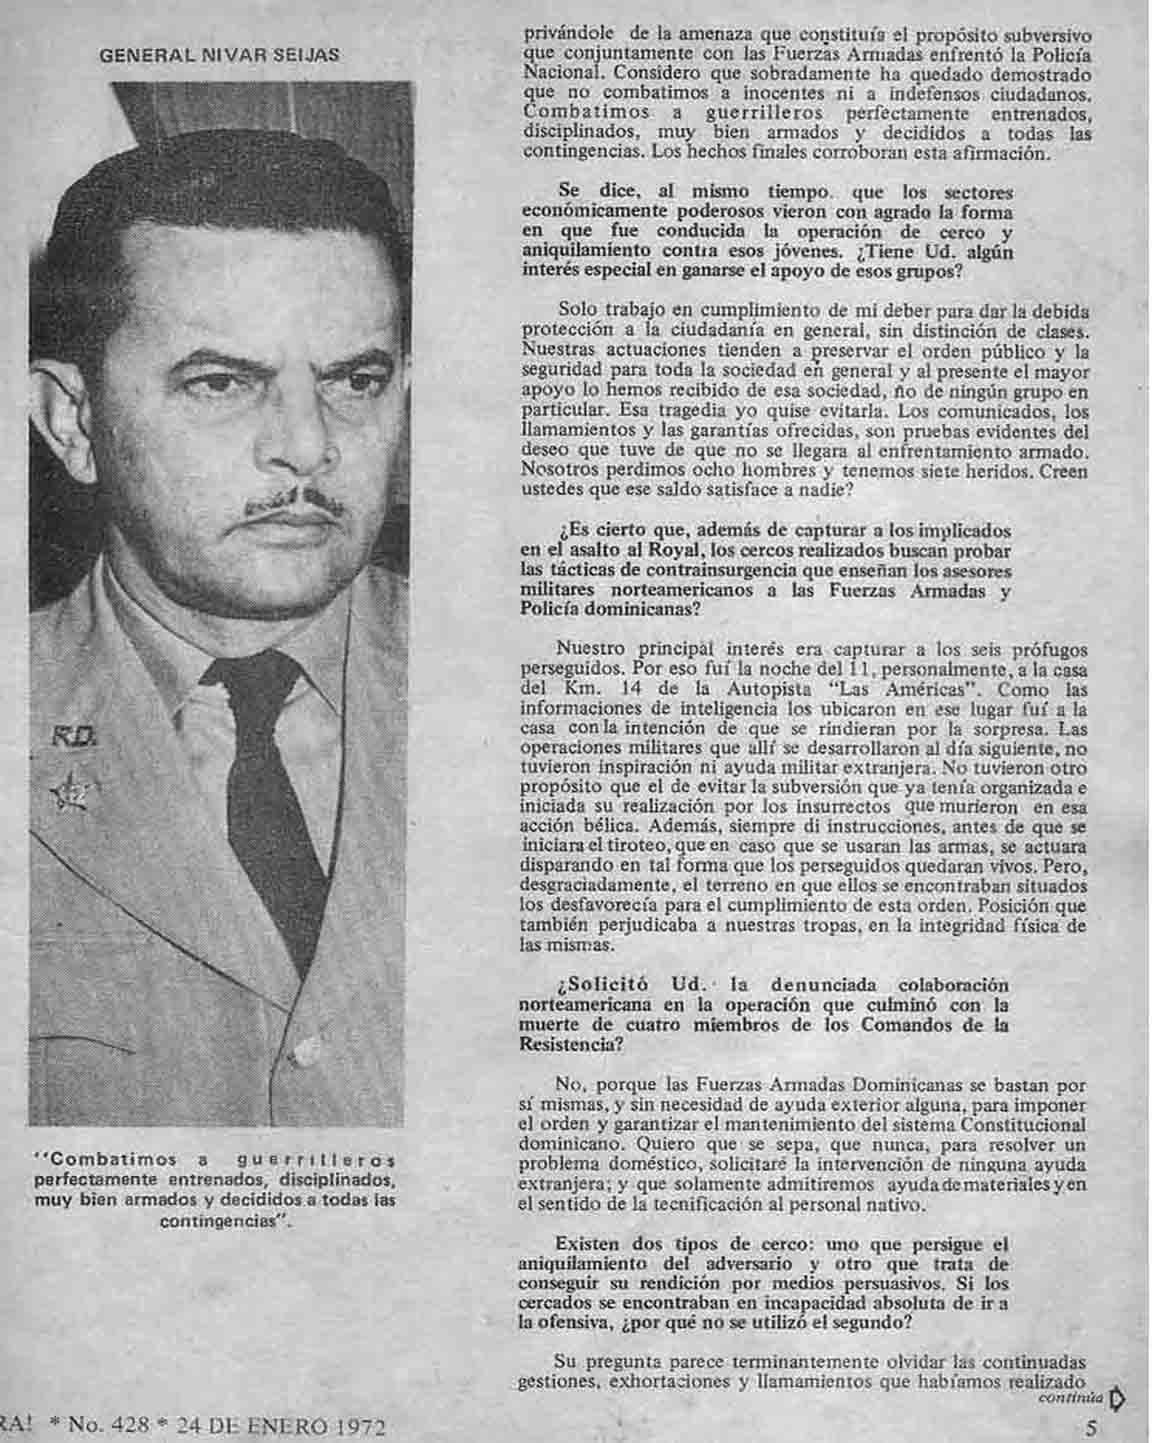 #CONTINUATION PAGE 2 OF 5 : EXCLUSIVE #: INTERVIEW WITH LIEUTENANT-GENERAL NEIT RAFAEL NÍVAR SEIJAS ( HEAD OF MILITARY COMBAT OPERATIONS January 12 1972 ) by JOURNALIST ORLANDO MARTINEZ FOR THE MAGAZINE NOW AND ITS ISSUE #NOW#428 (PAGE 4) .TRANSFER OF MAGAZINE ON PAPER TO DIGITAL TECHNOLOGY : = (WORKSHOPS LOGISTOS "clappers" 2013.)